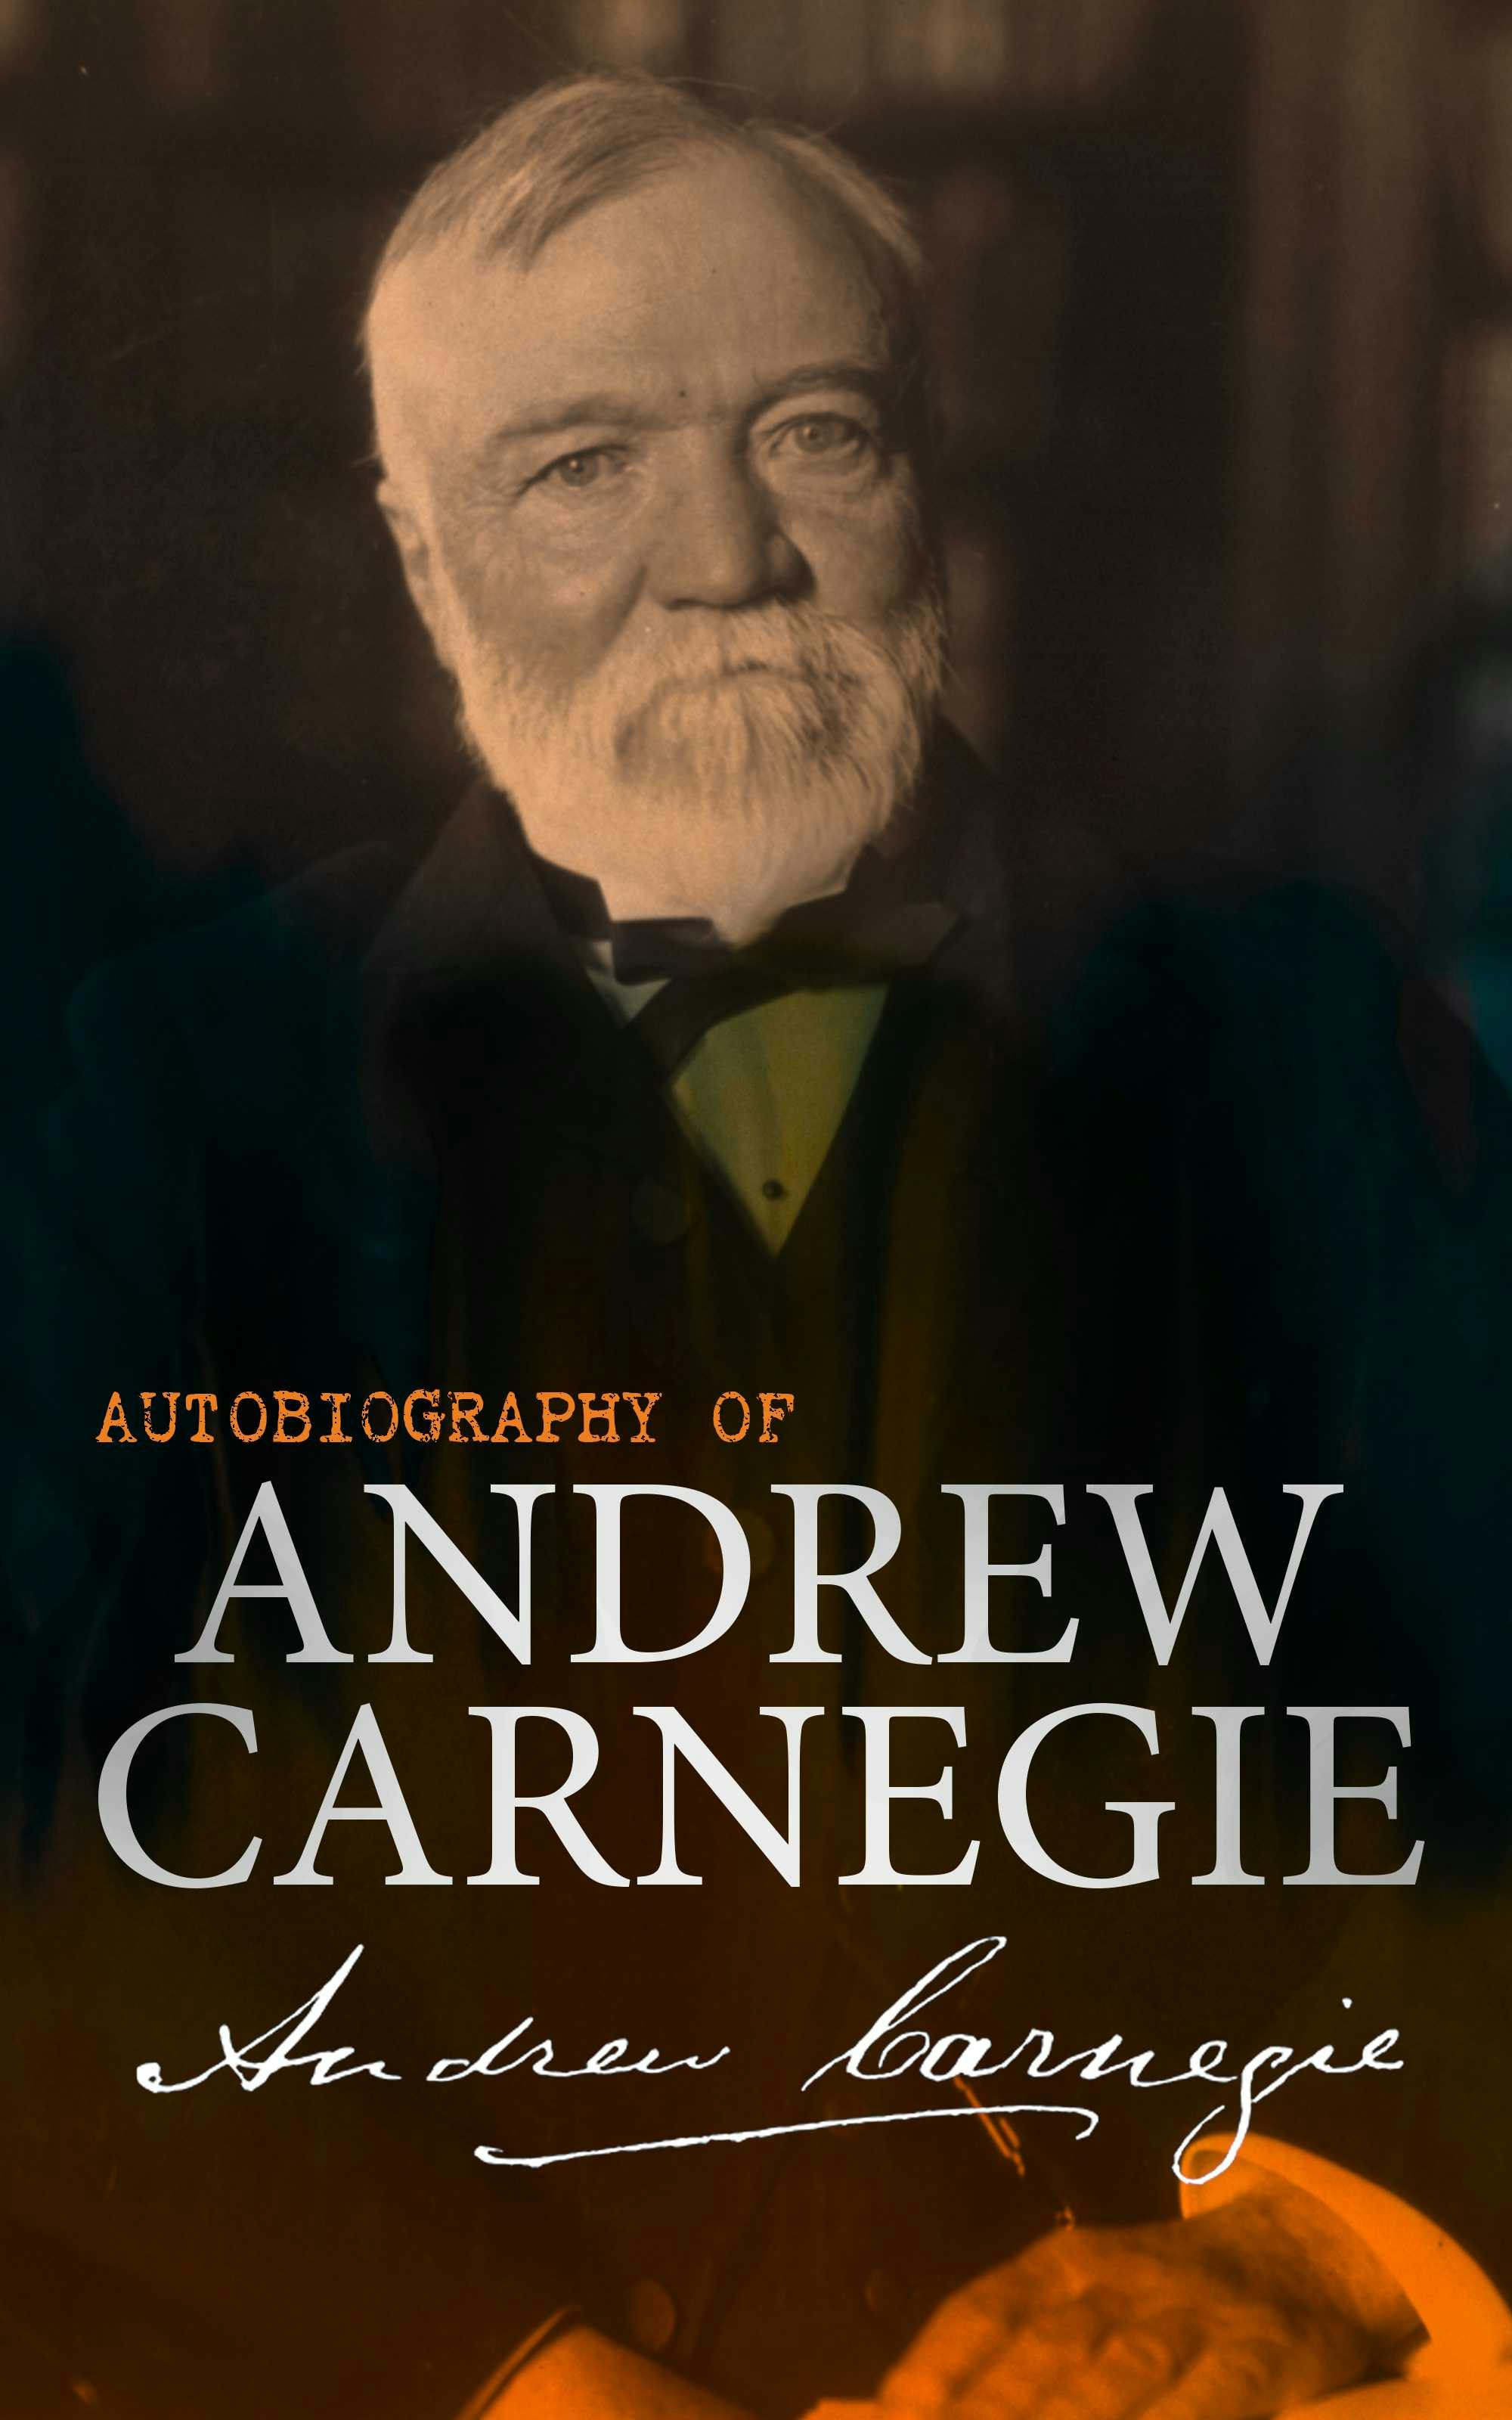 Autobiography of Andrew Carnegie: With The Gospel of Wealth - Andrew Carnegie